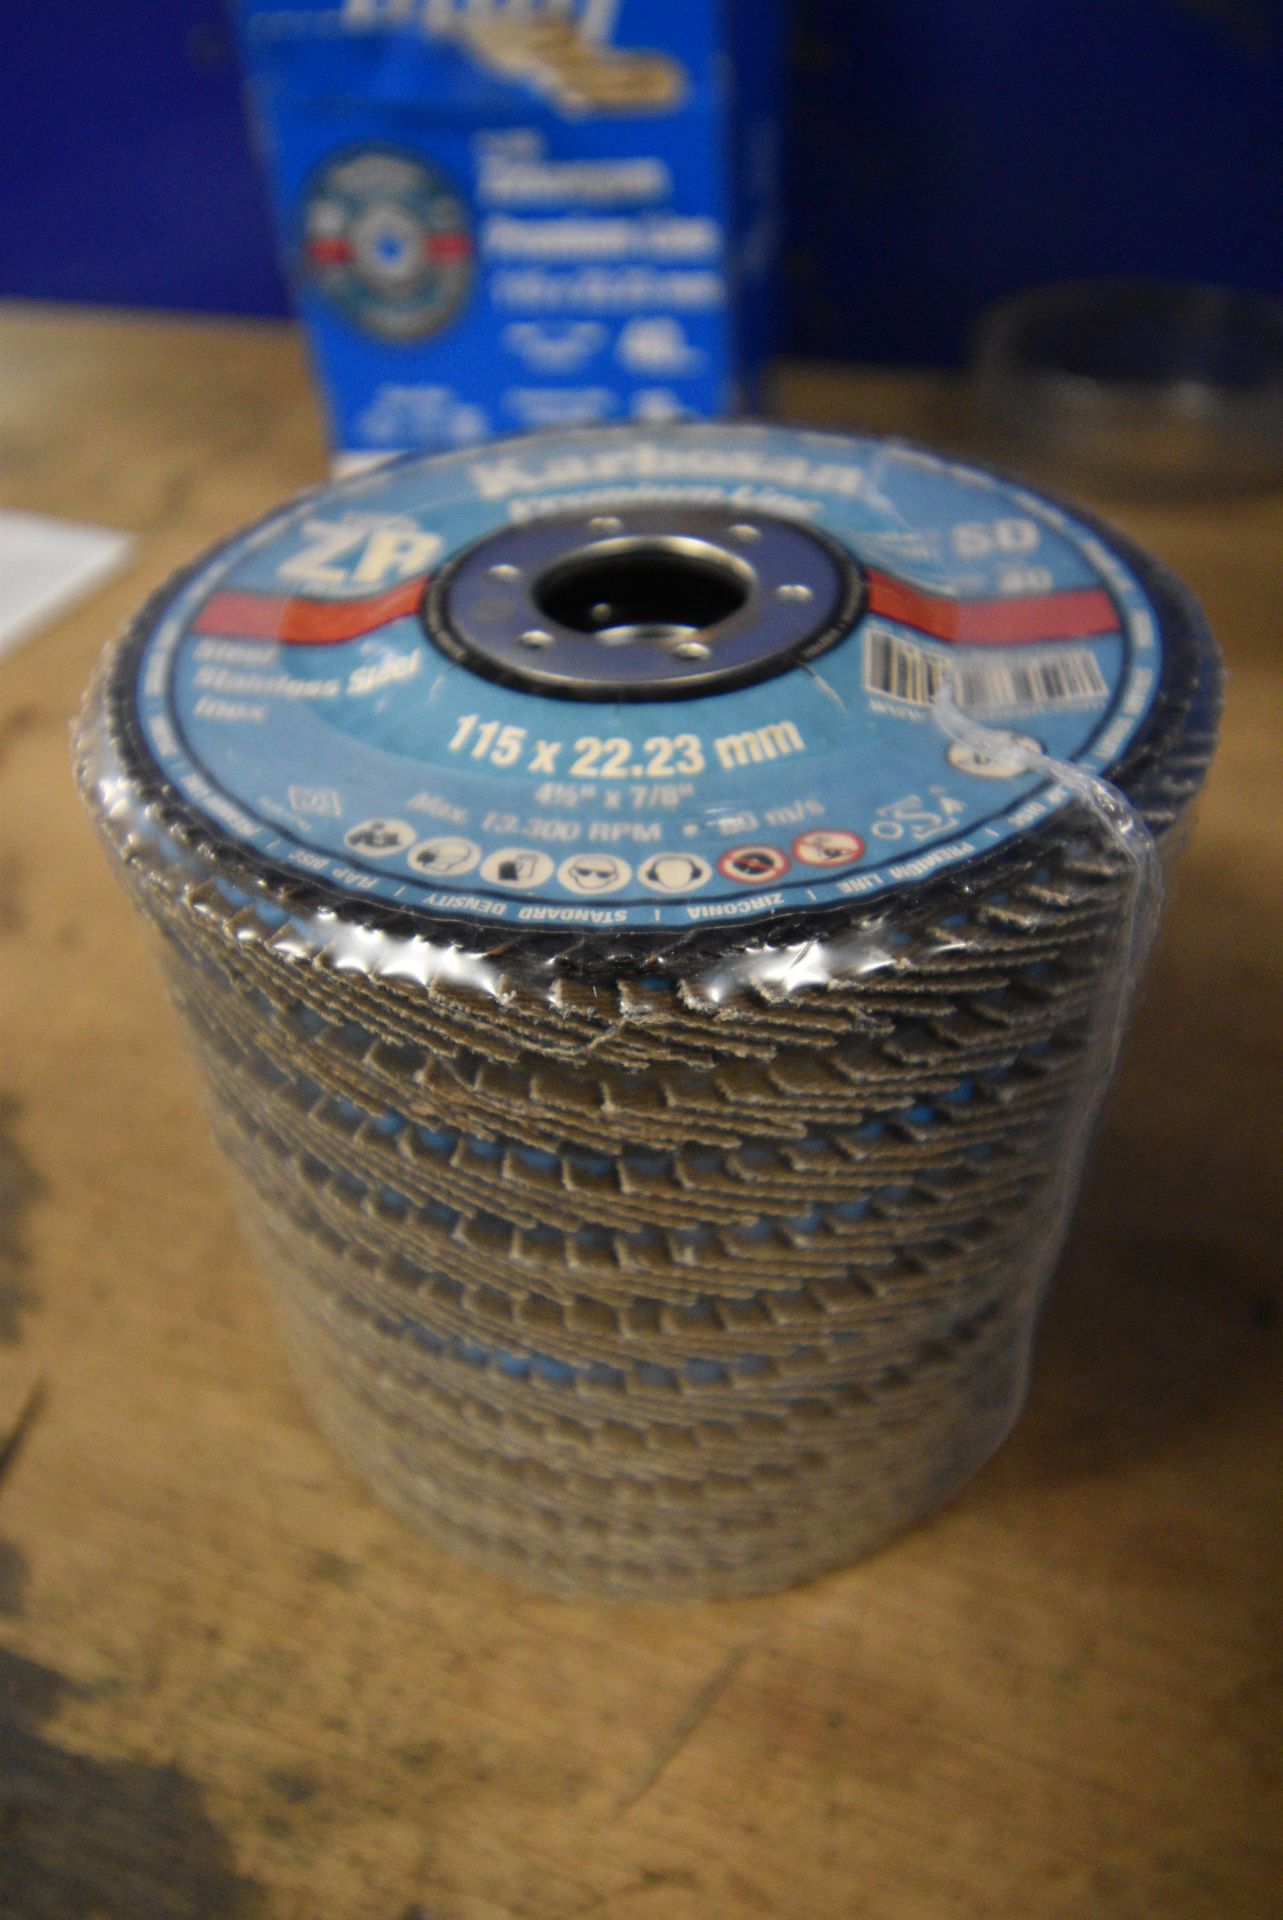 Two Boxes of 10 Flap Discs 115x22.23mm - Image 2 of 2